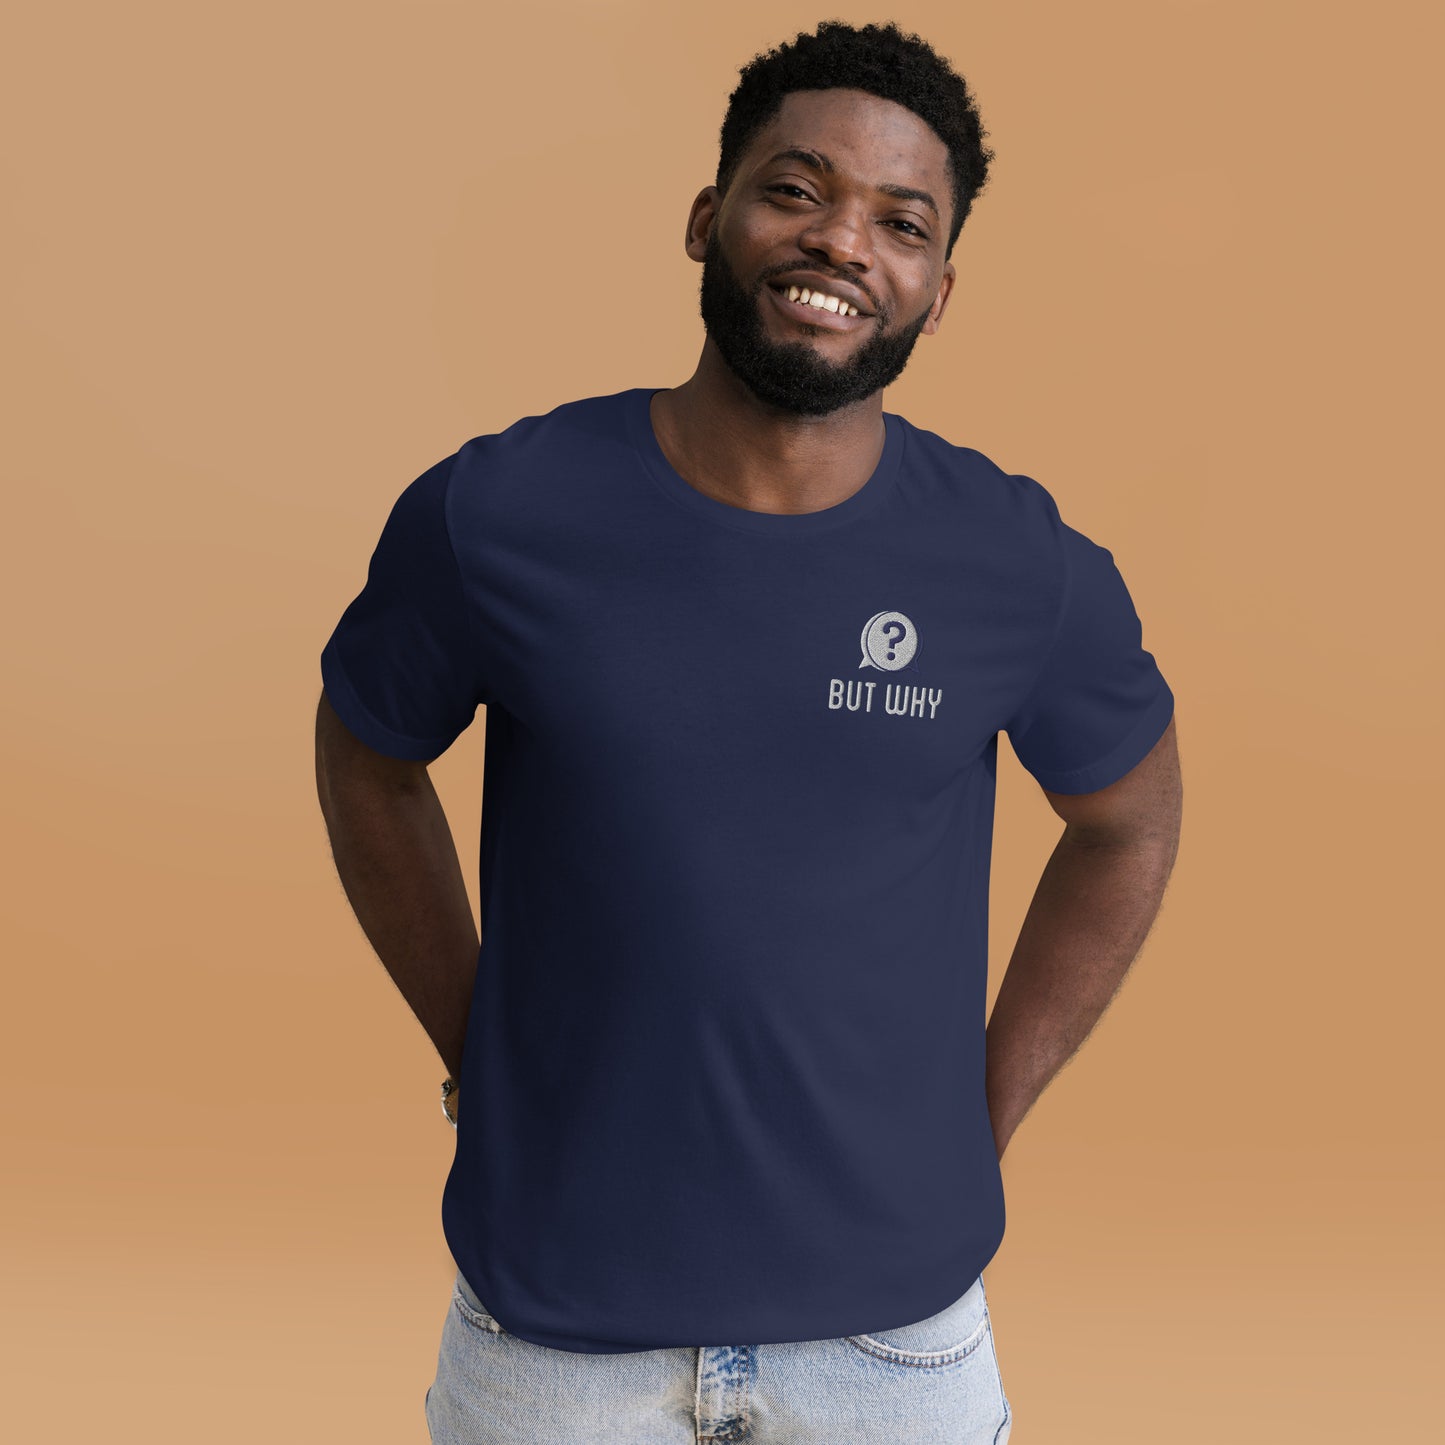 Adult Unisex T-Shirt - Embroidered But Why Logo (multiple colors)